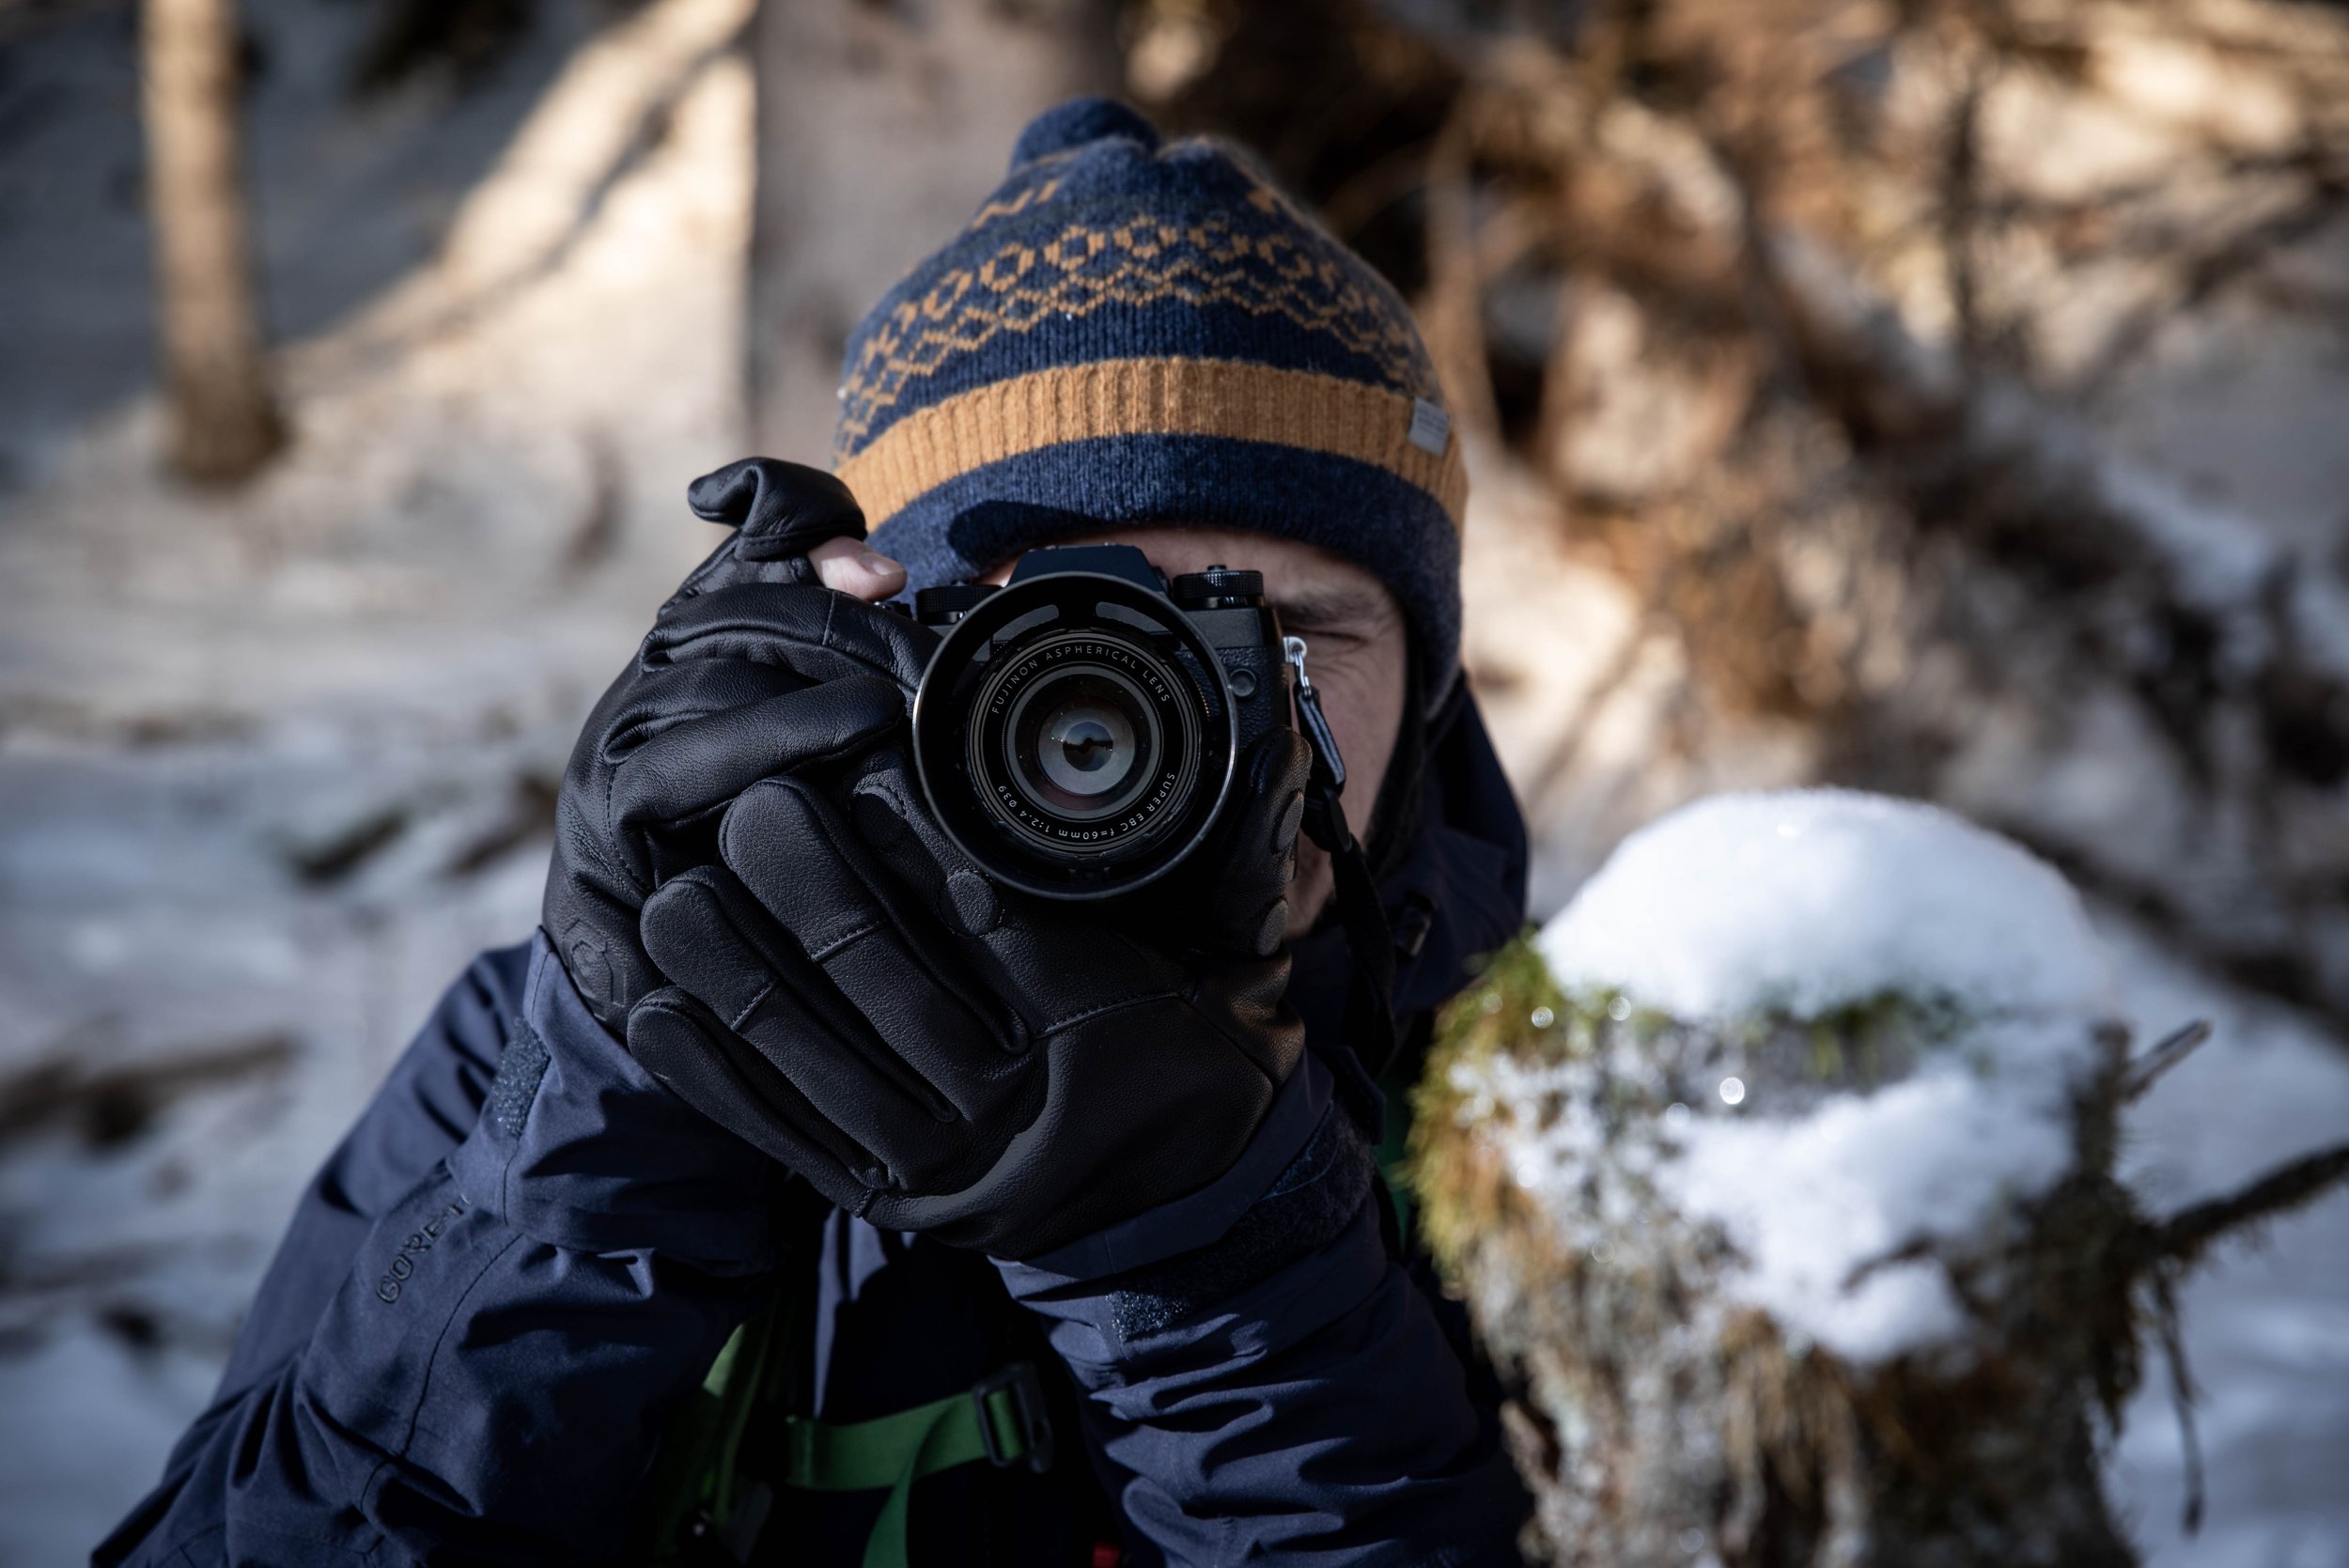 Photography gloves: The #1 gloves for photographers